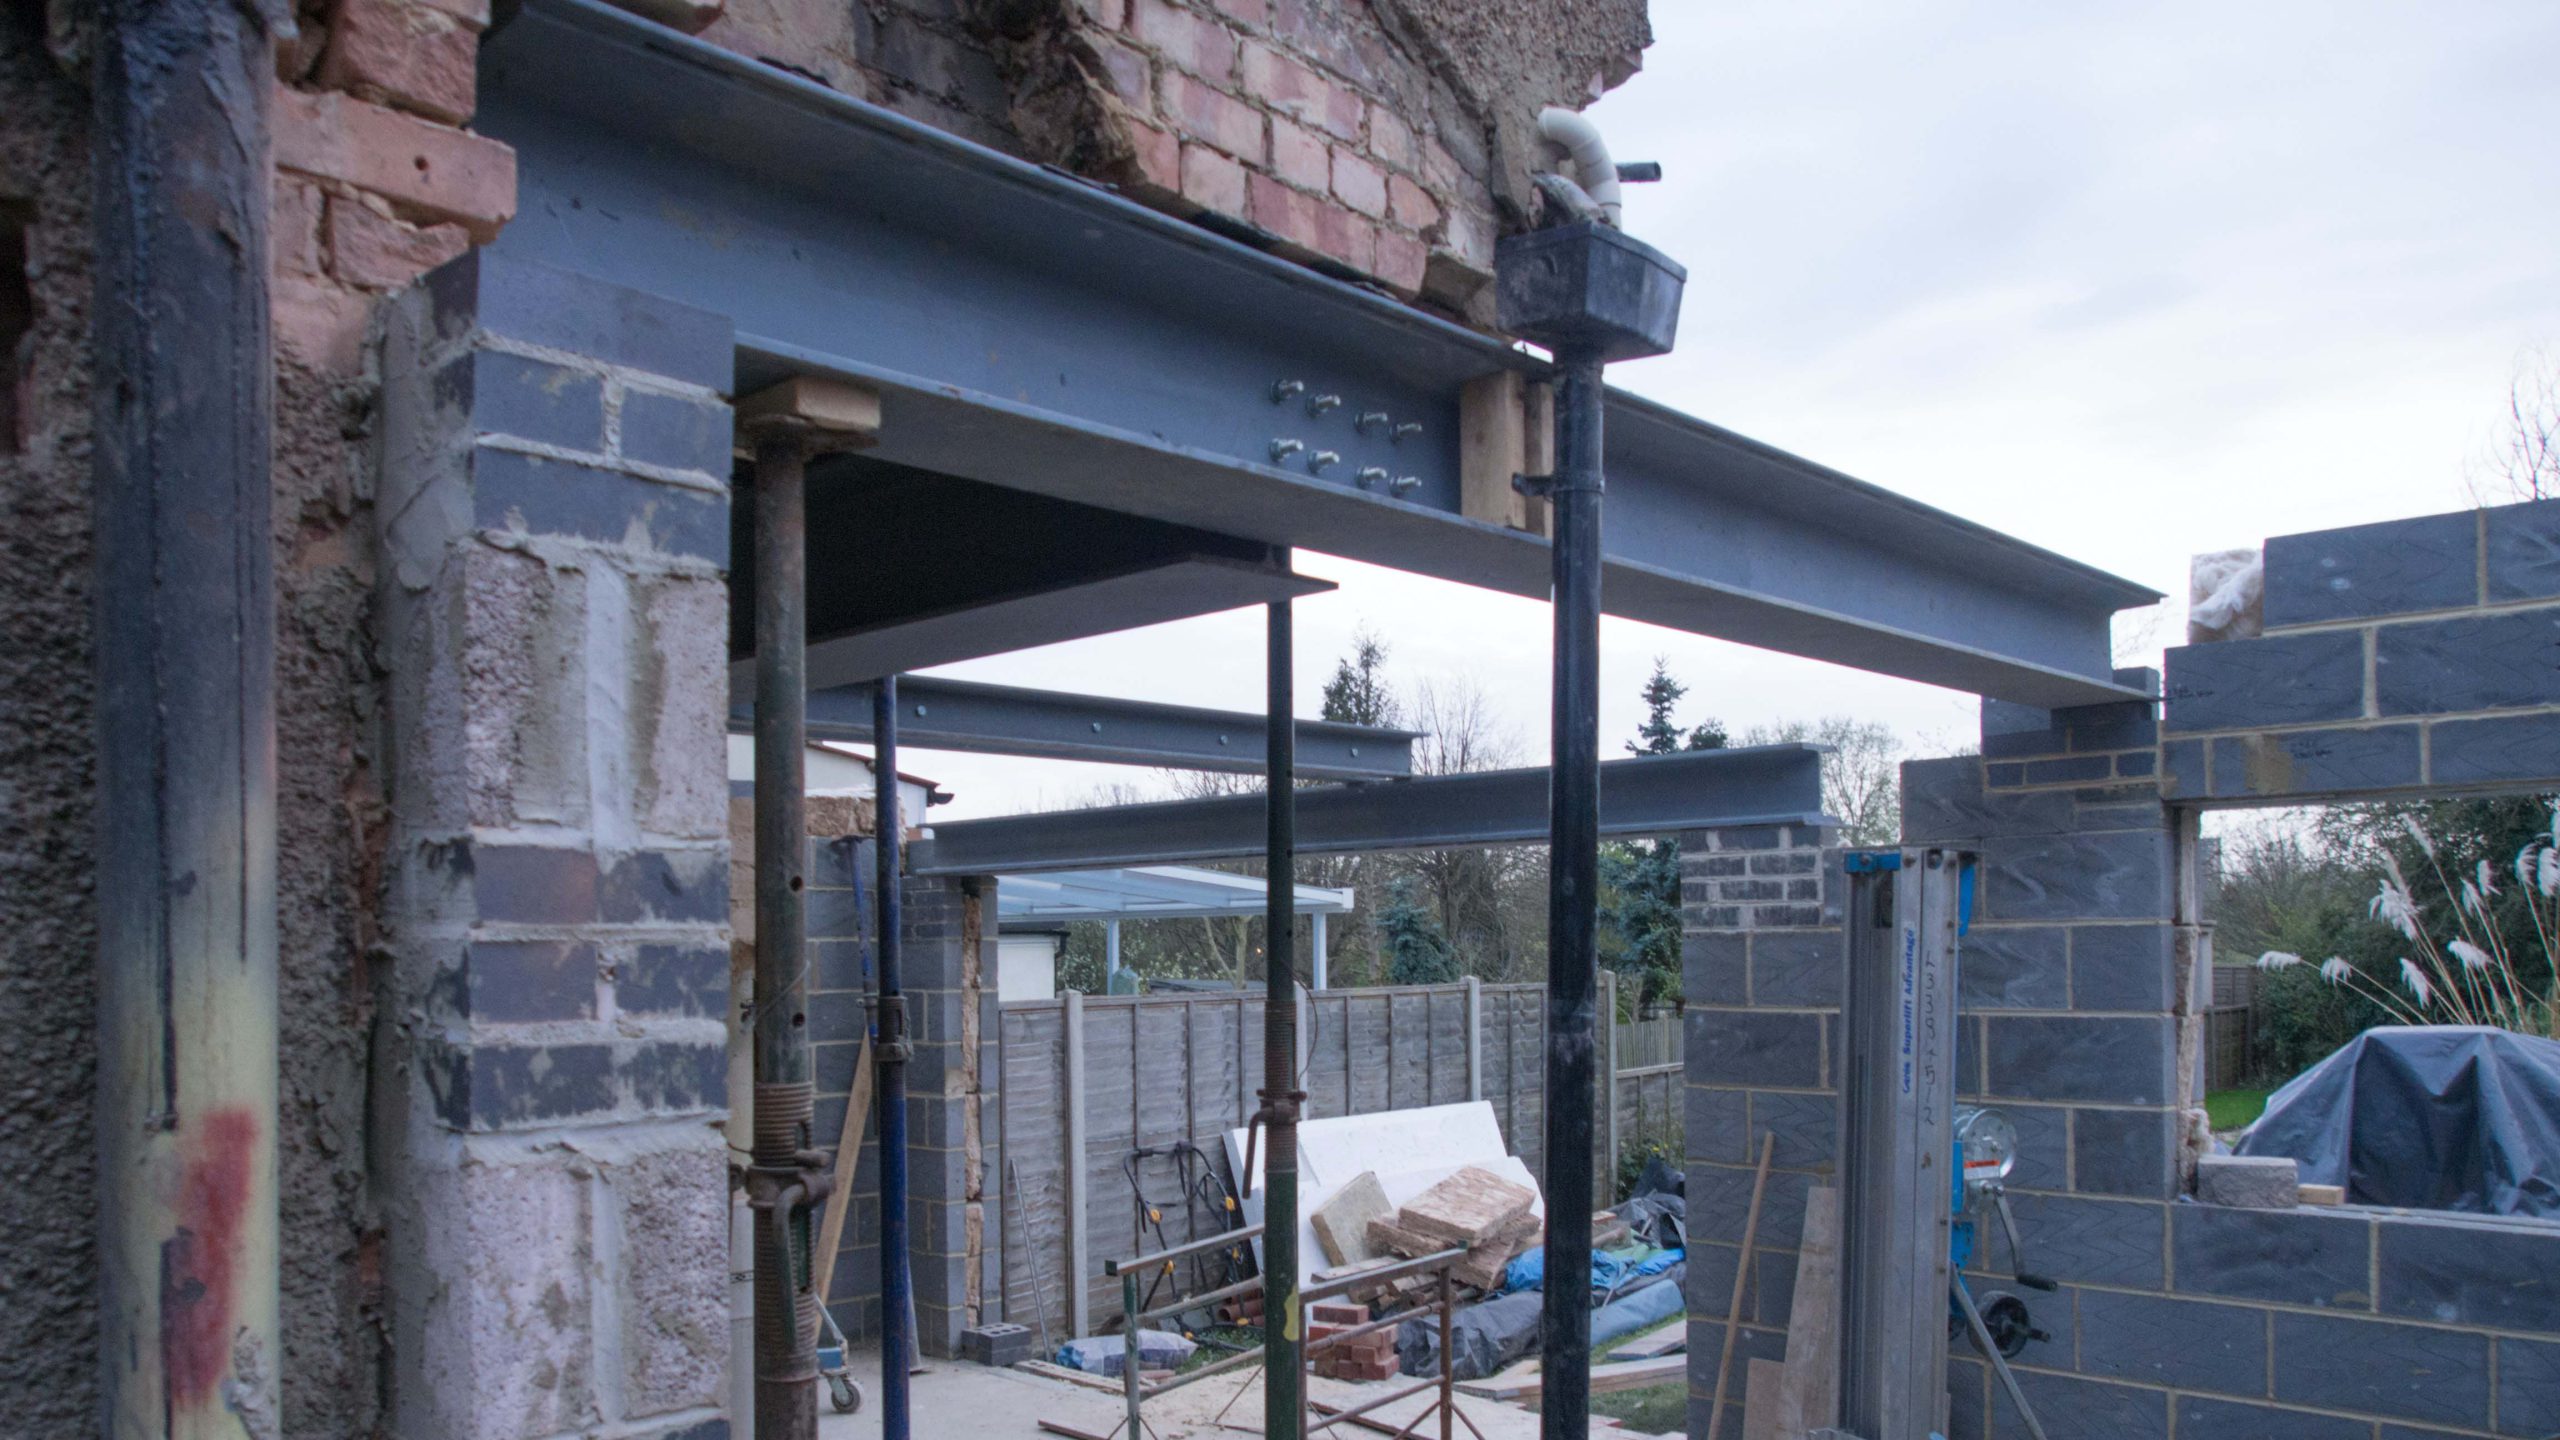 Scaffolding and metal beam holding up a half finished extension to a suburban house